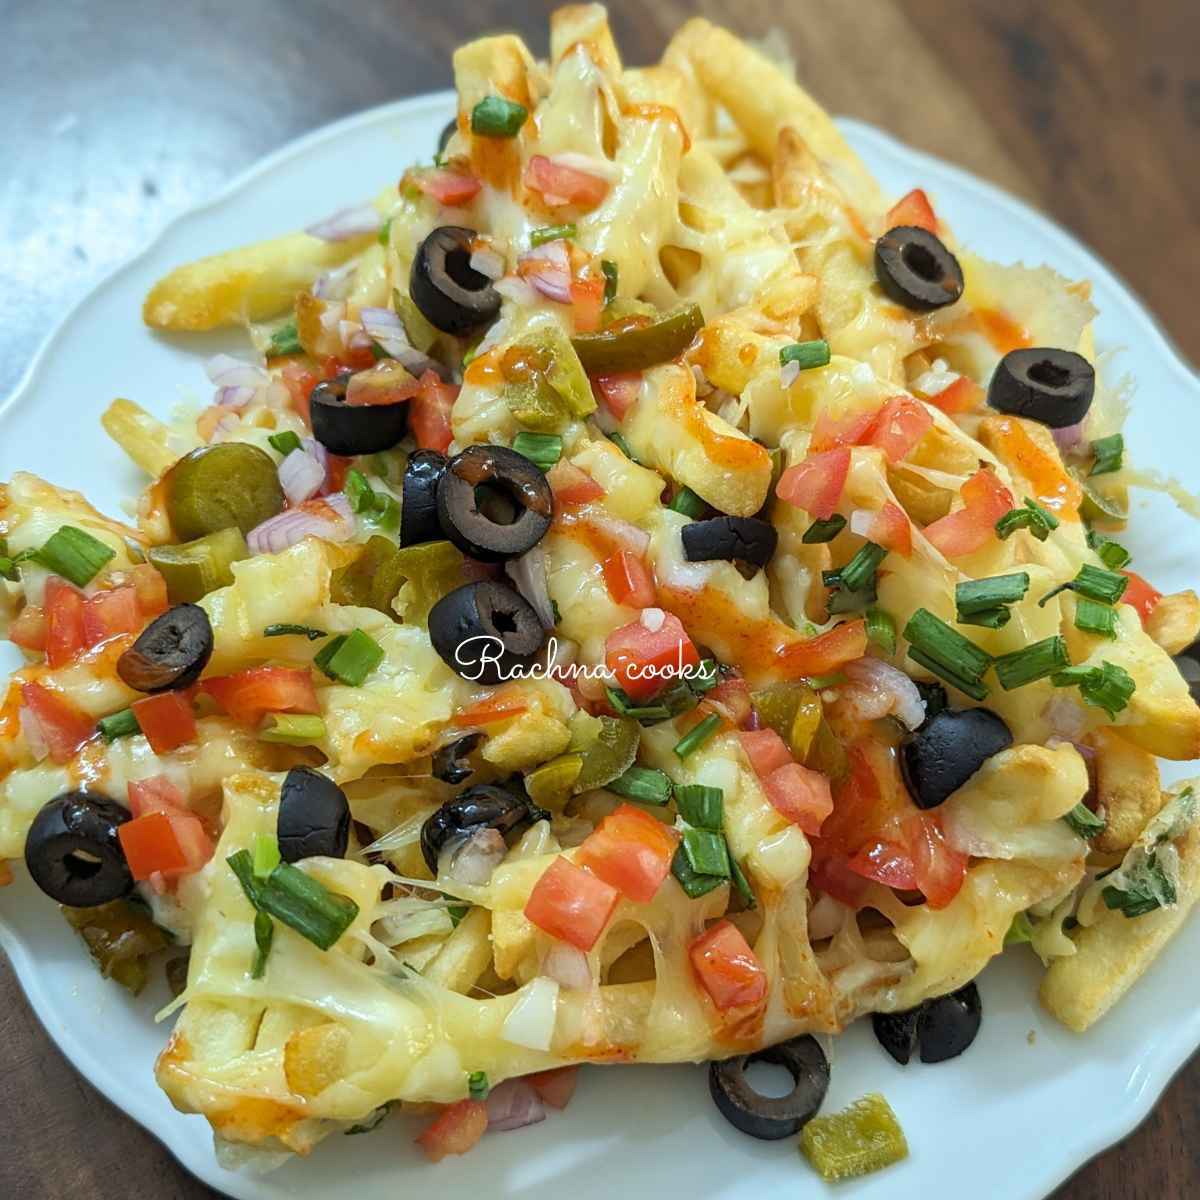 Delicious loaded fries topped with melted cheese and toppings.